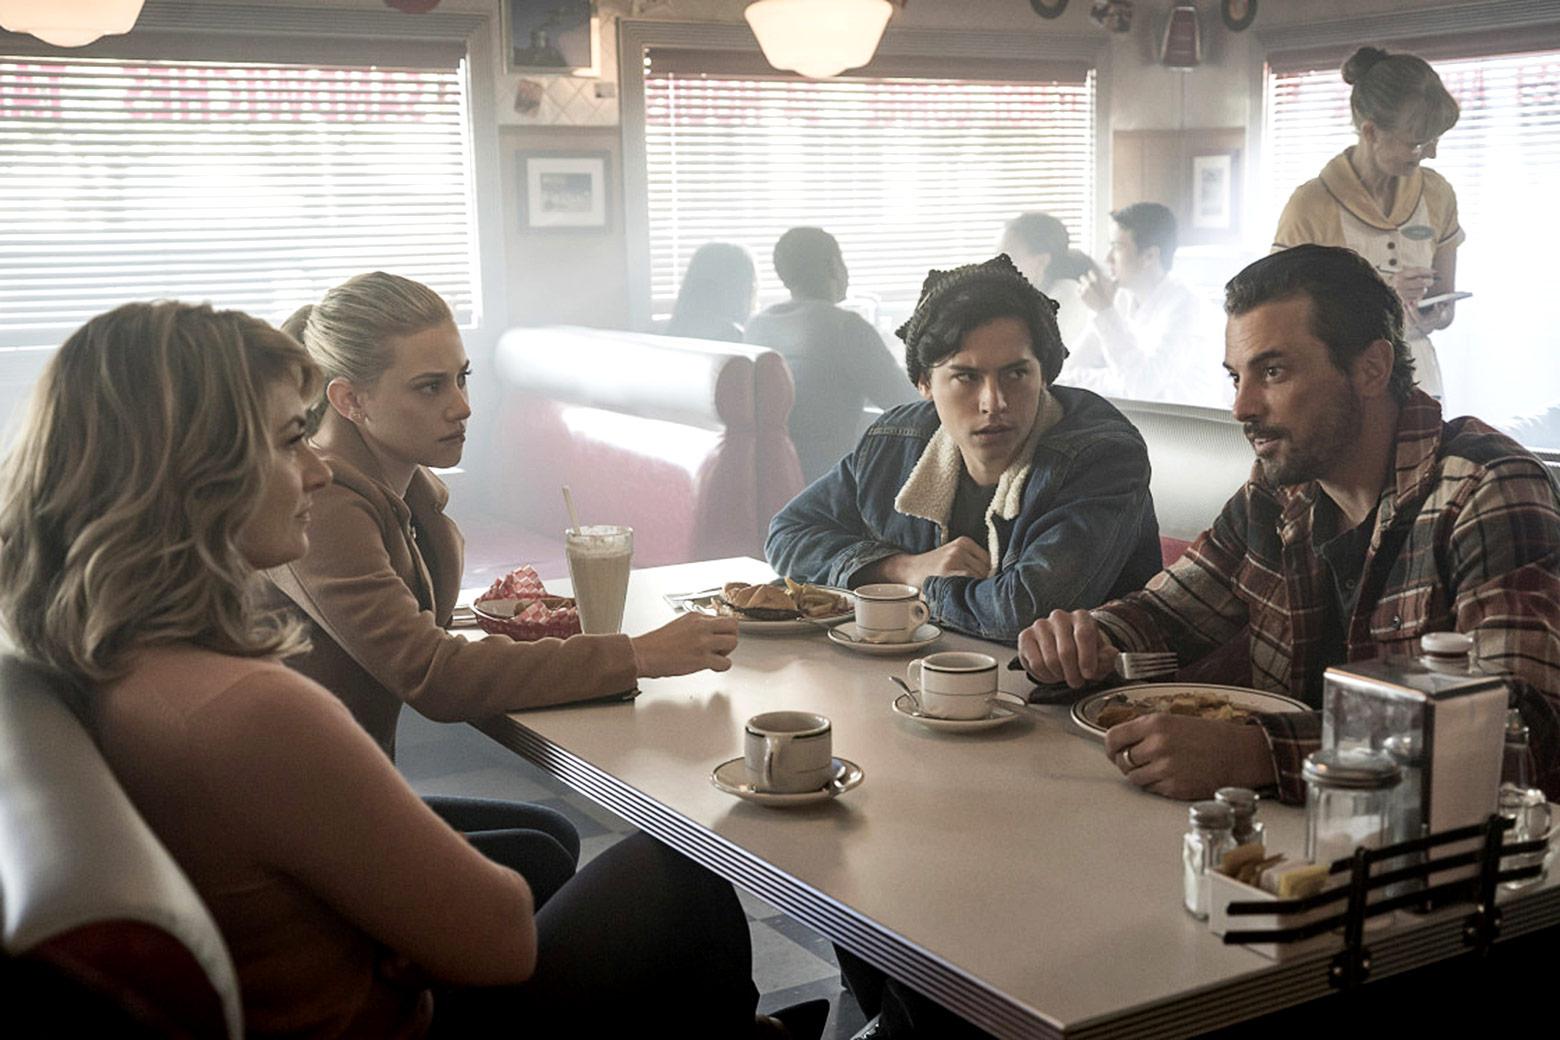 Mädchen Amick, Lili Reinhart, Cole Sprouse, and Skeet Ulrich in Riverdale.